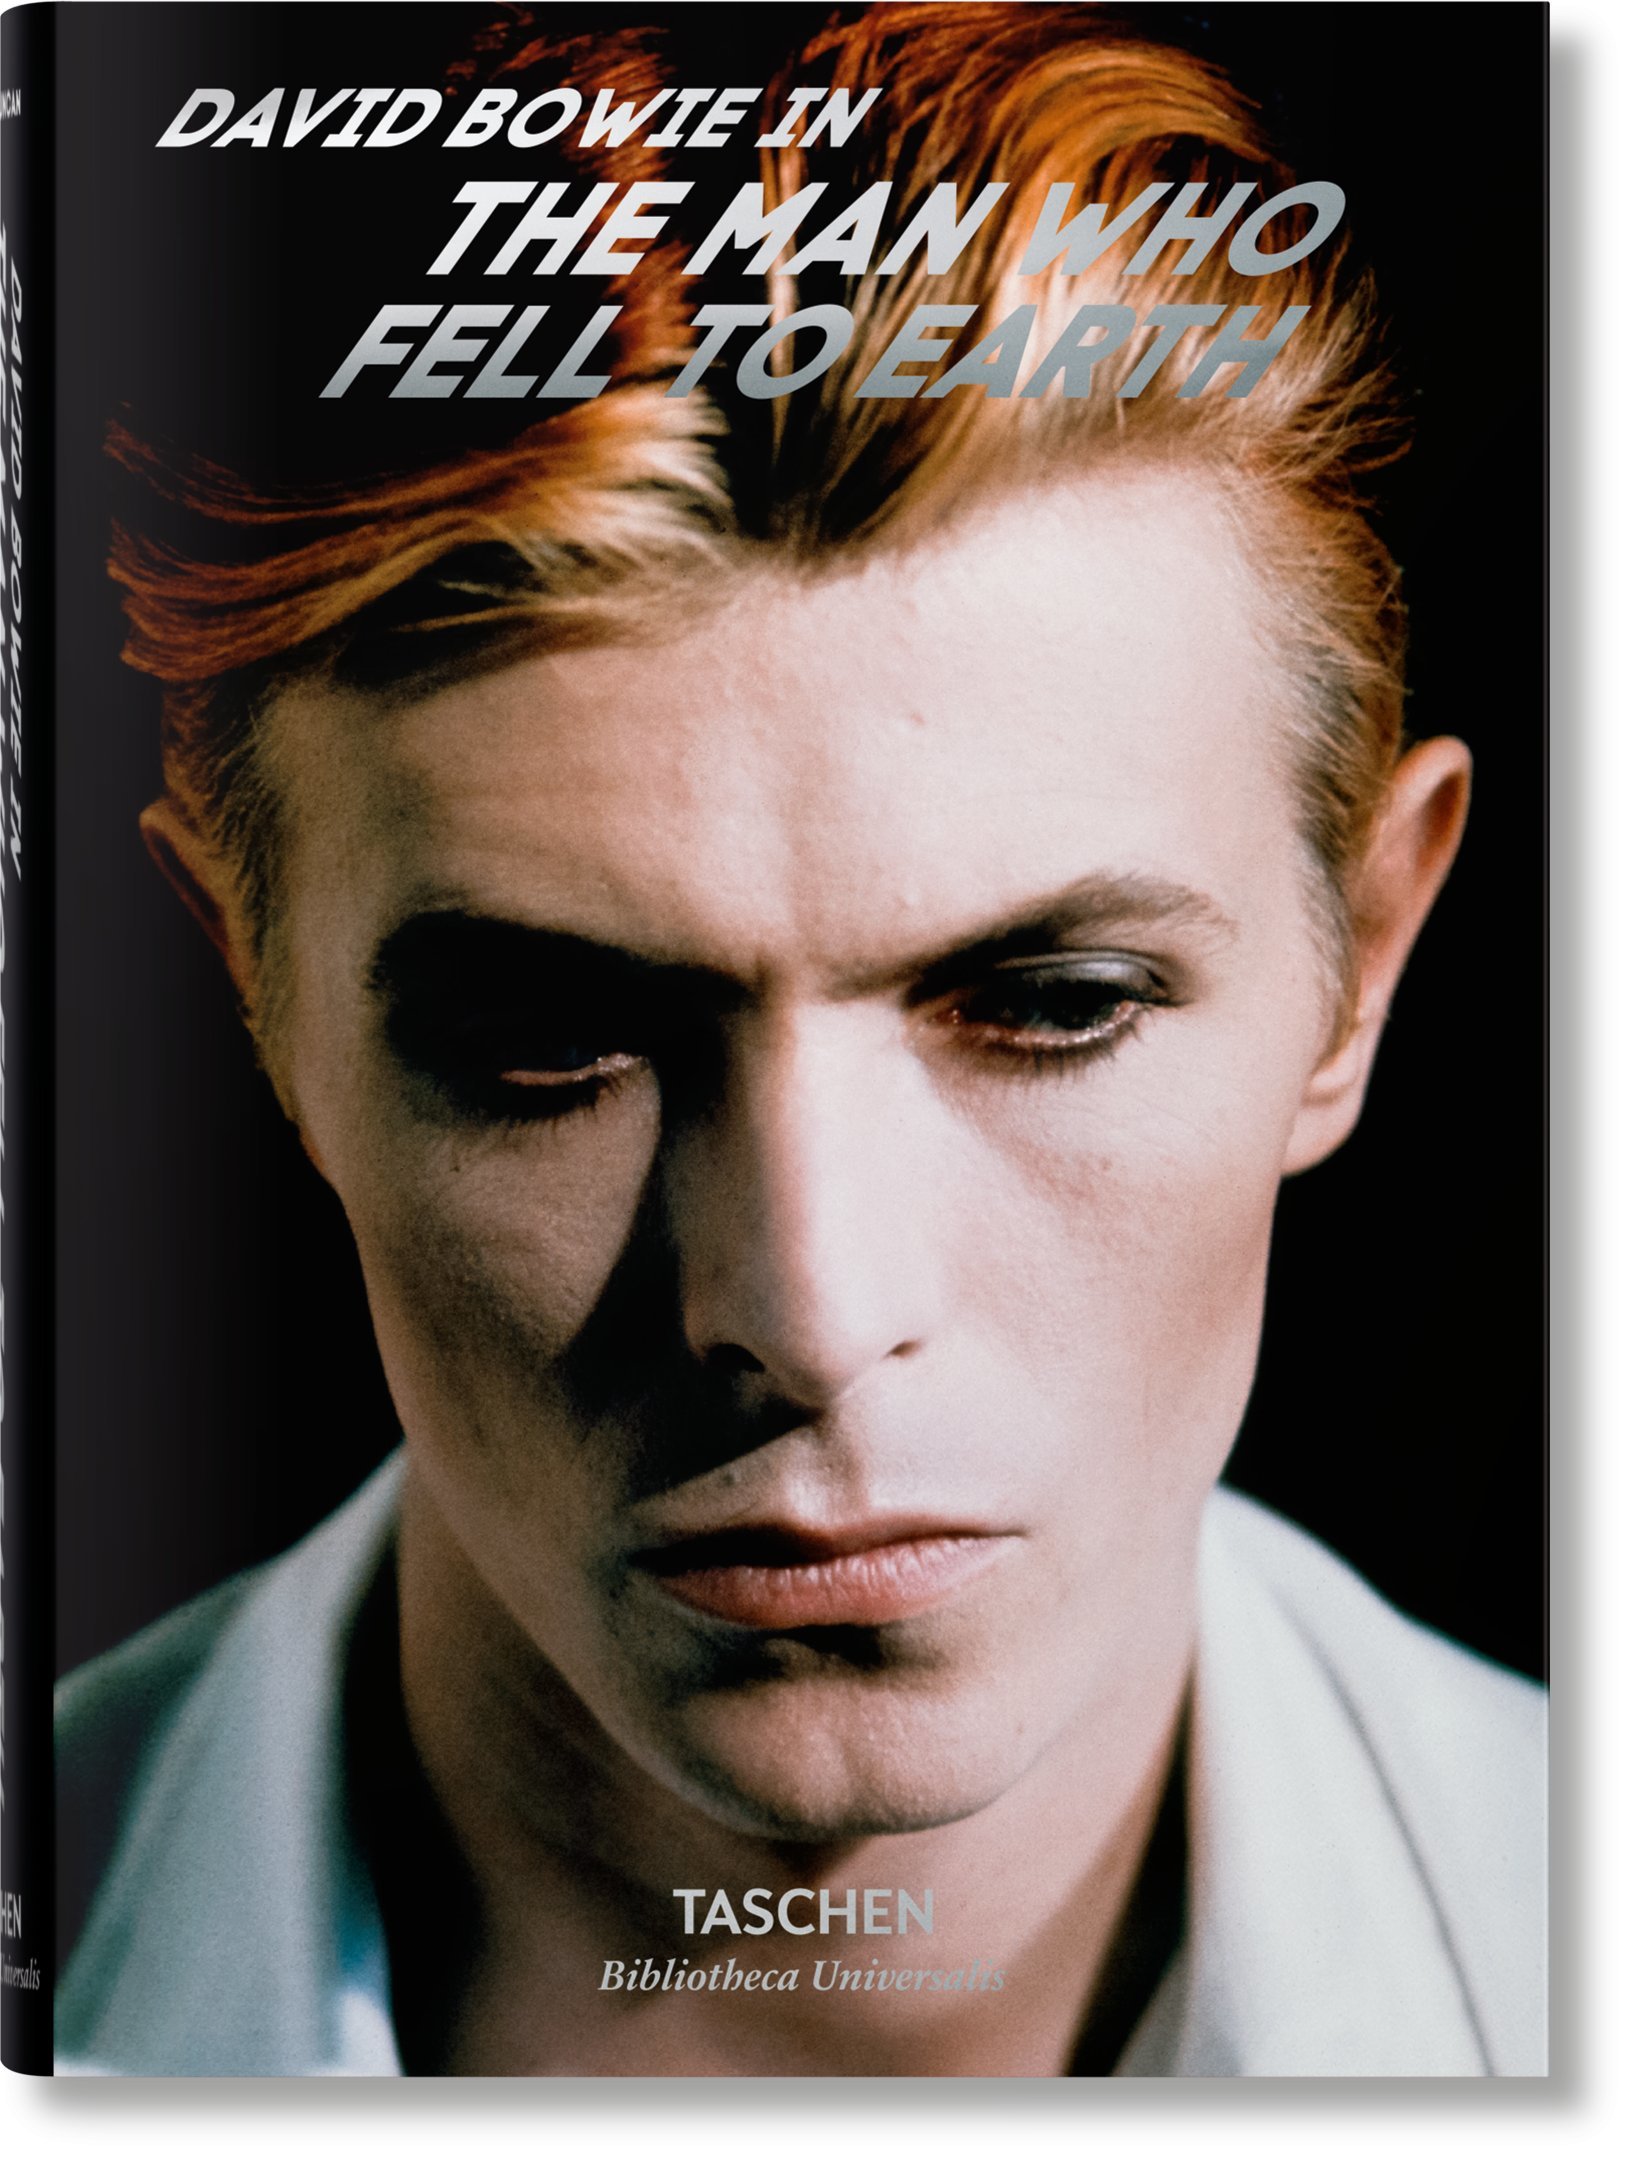 David Bowie in The Man Who Fell to Earth, by Taschen